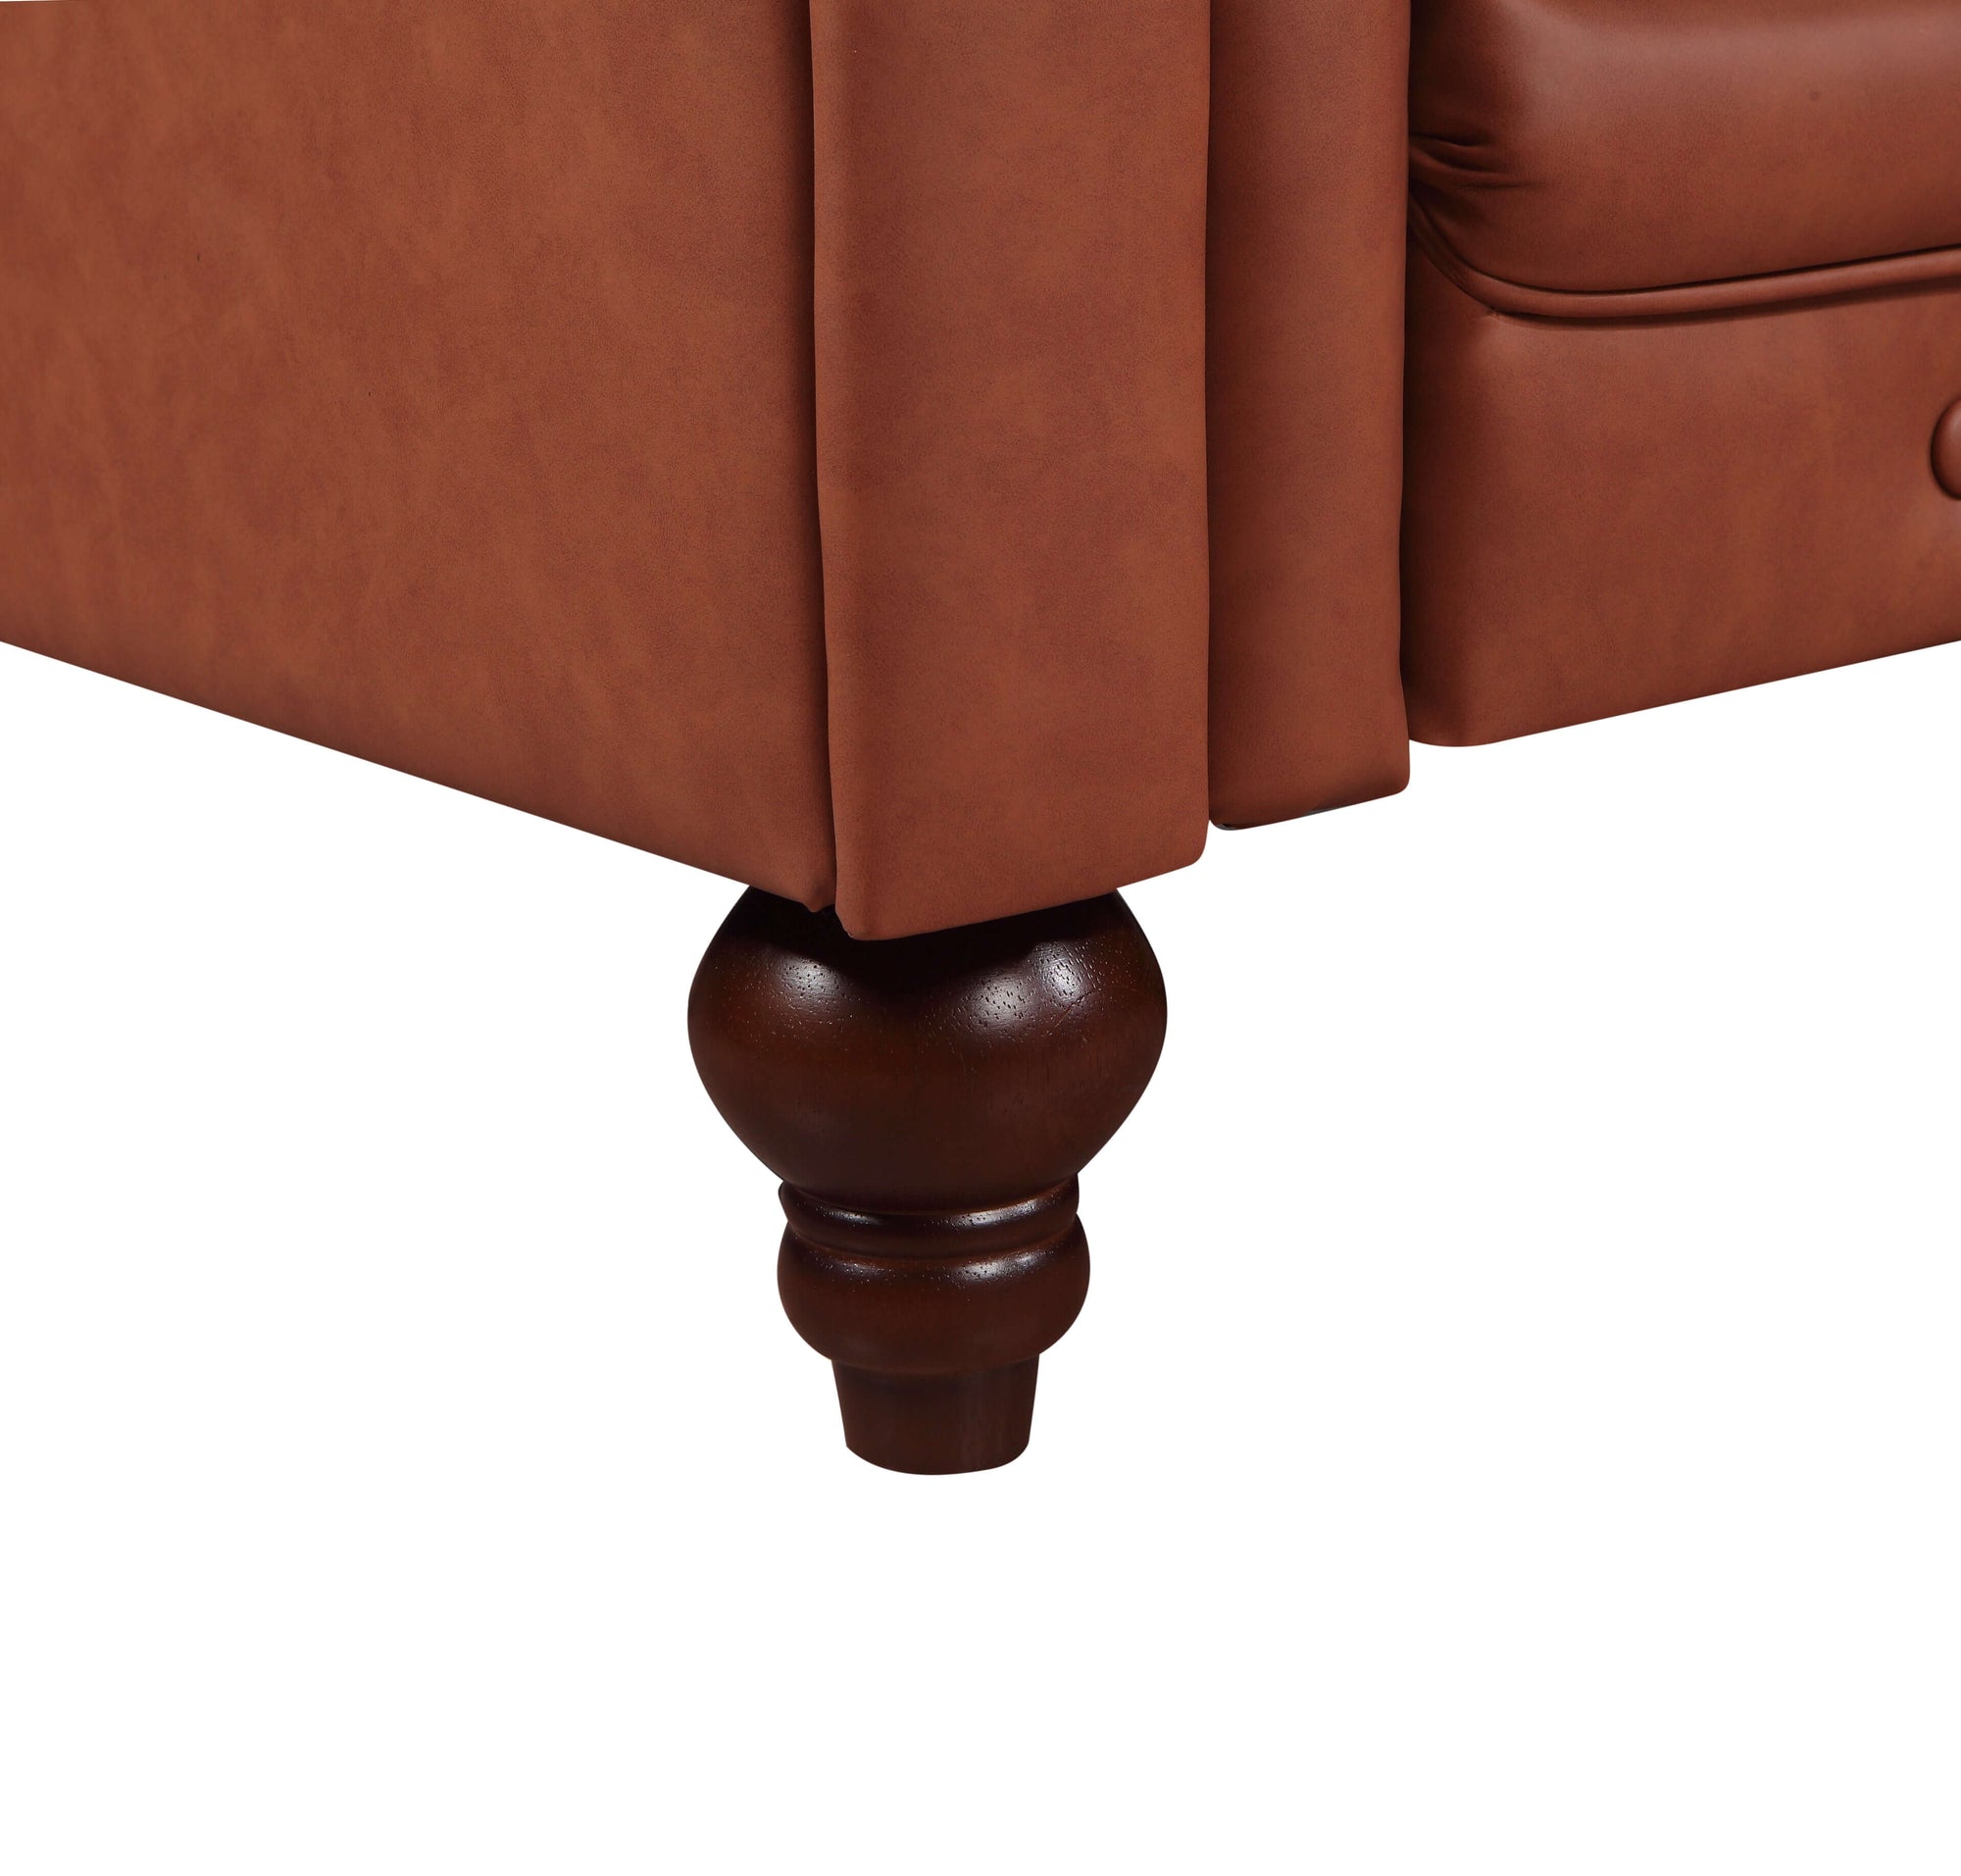 3 Seater Brown Sofa Lounge Chesterfireld Style Button Tufted in Faux Leather-Upinteriors